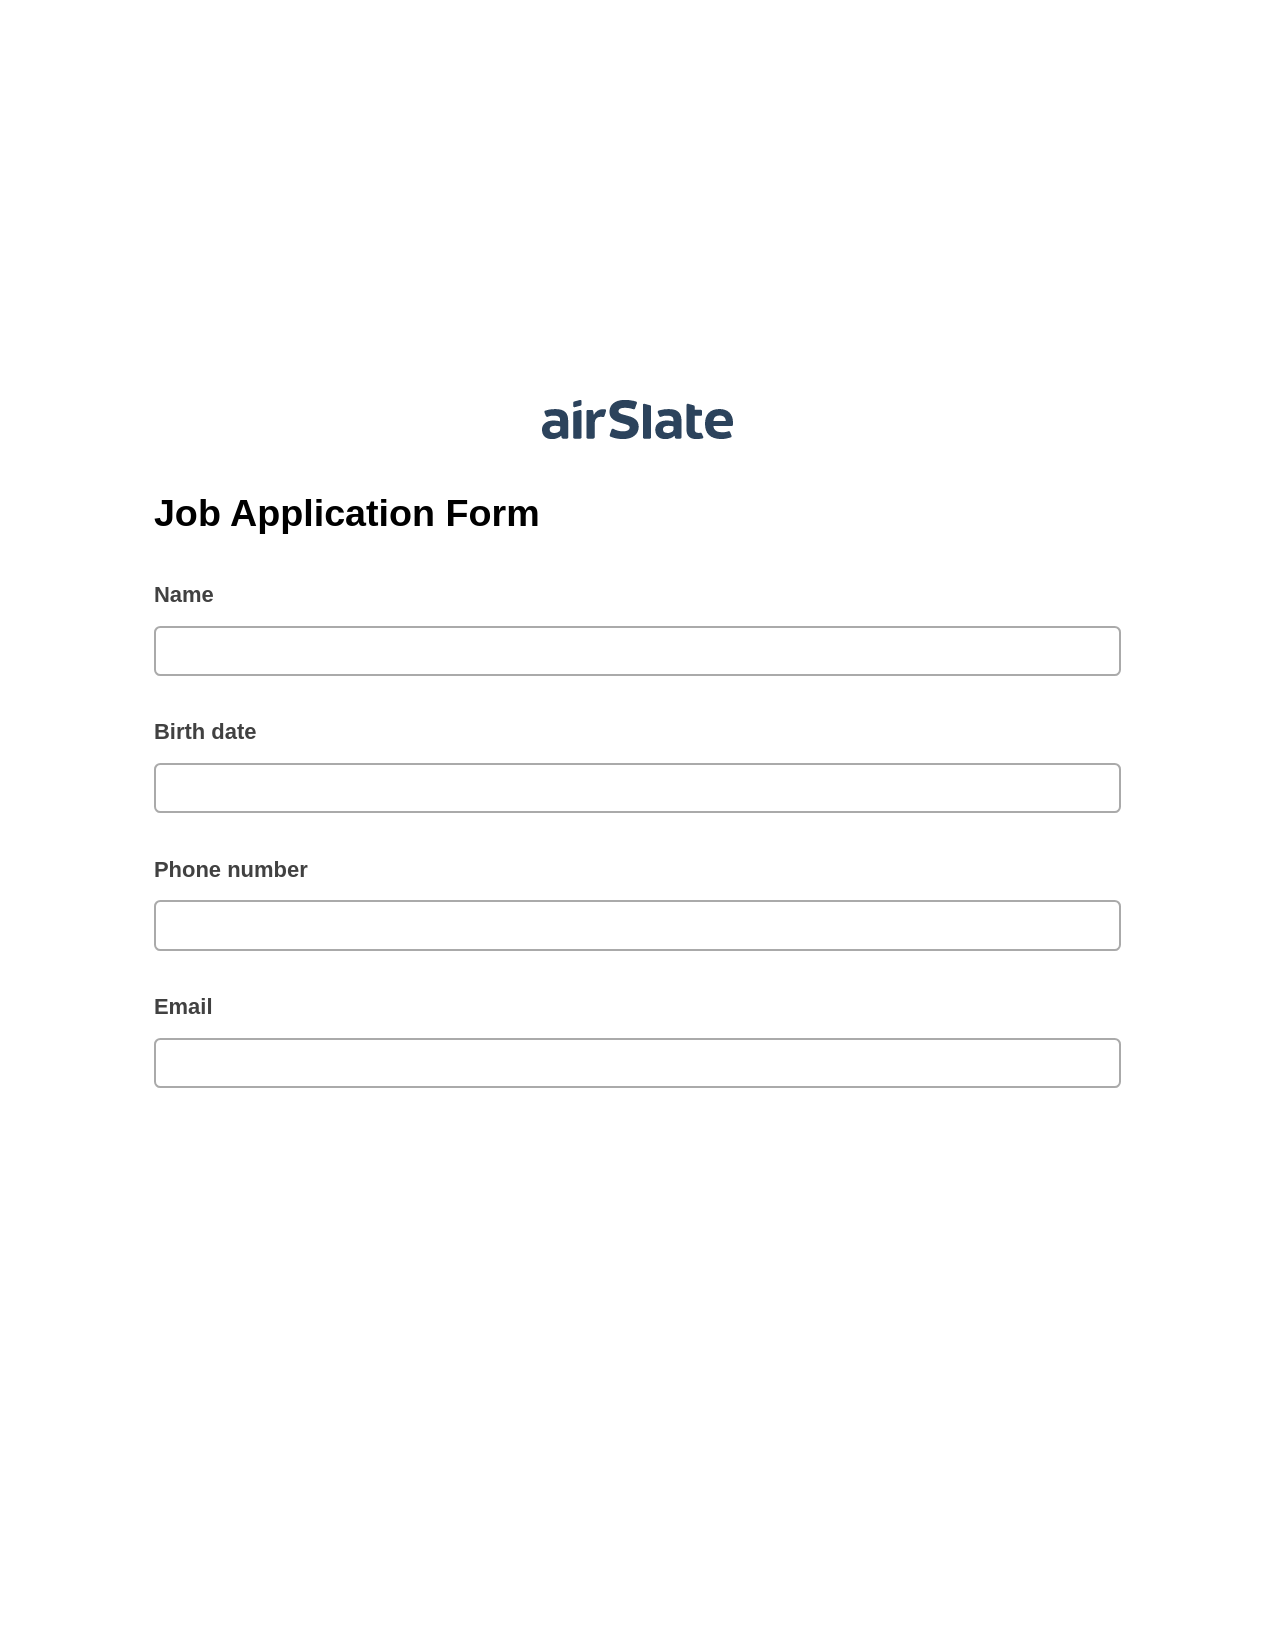 Multirole Job Application Form Pre-fill from Office 365 Excel Bot, Create NetSuite Records Bot, Export to NetSuite Record Bot